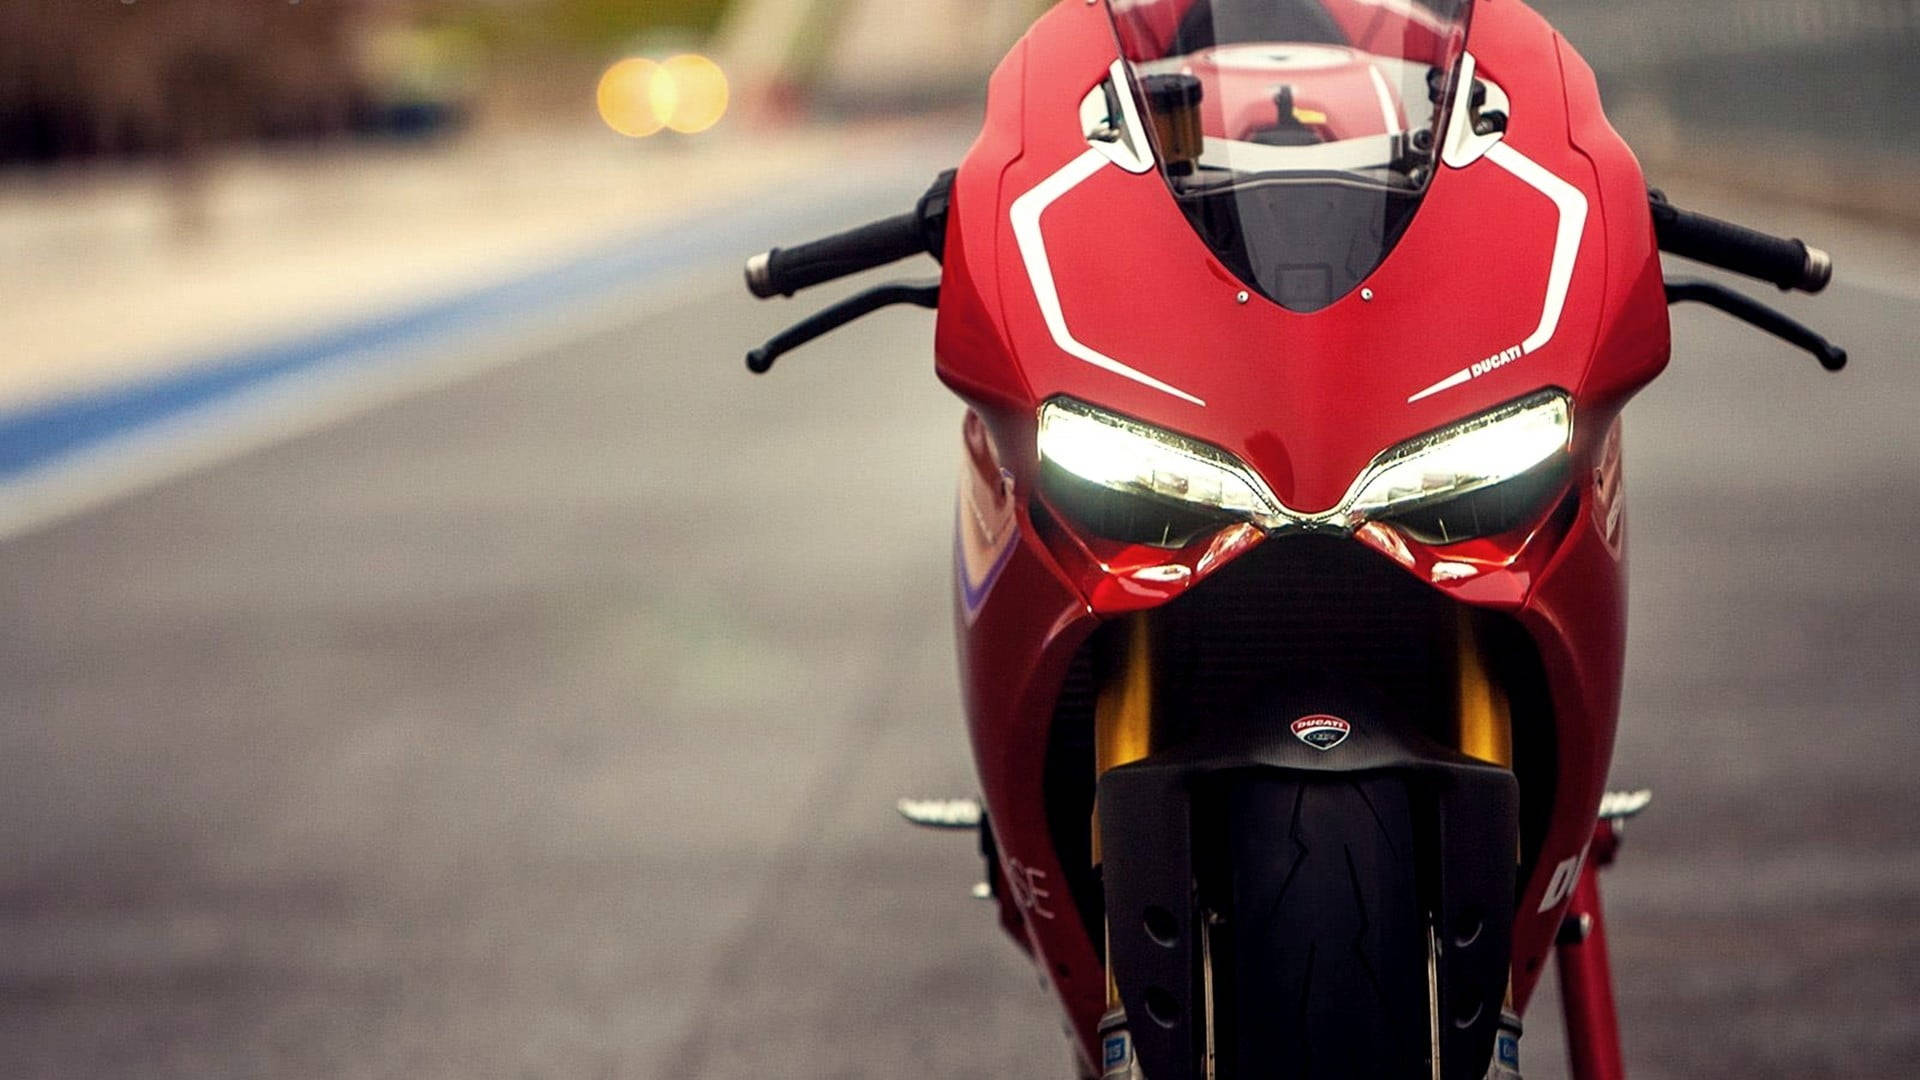 Blaze Through The Air with the Ducati 1199 Panigale R Superbike Wallpaper